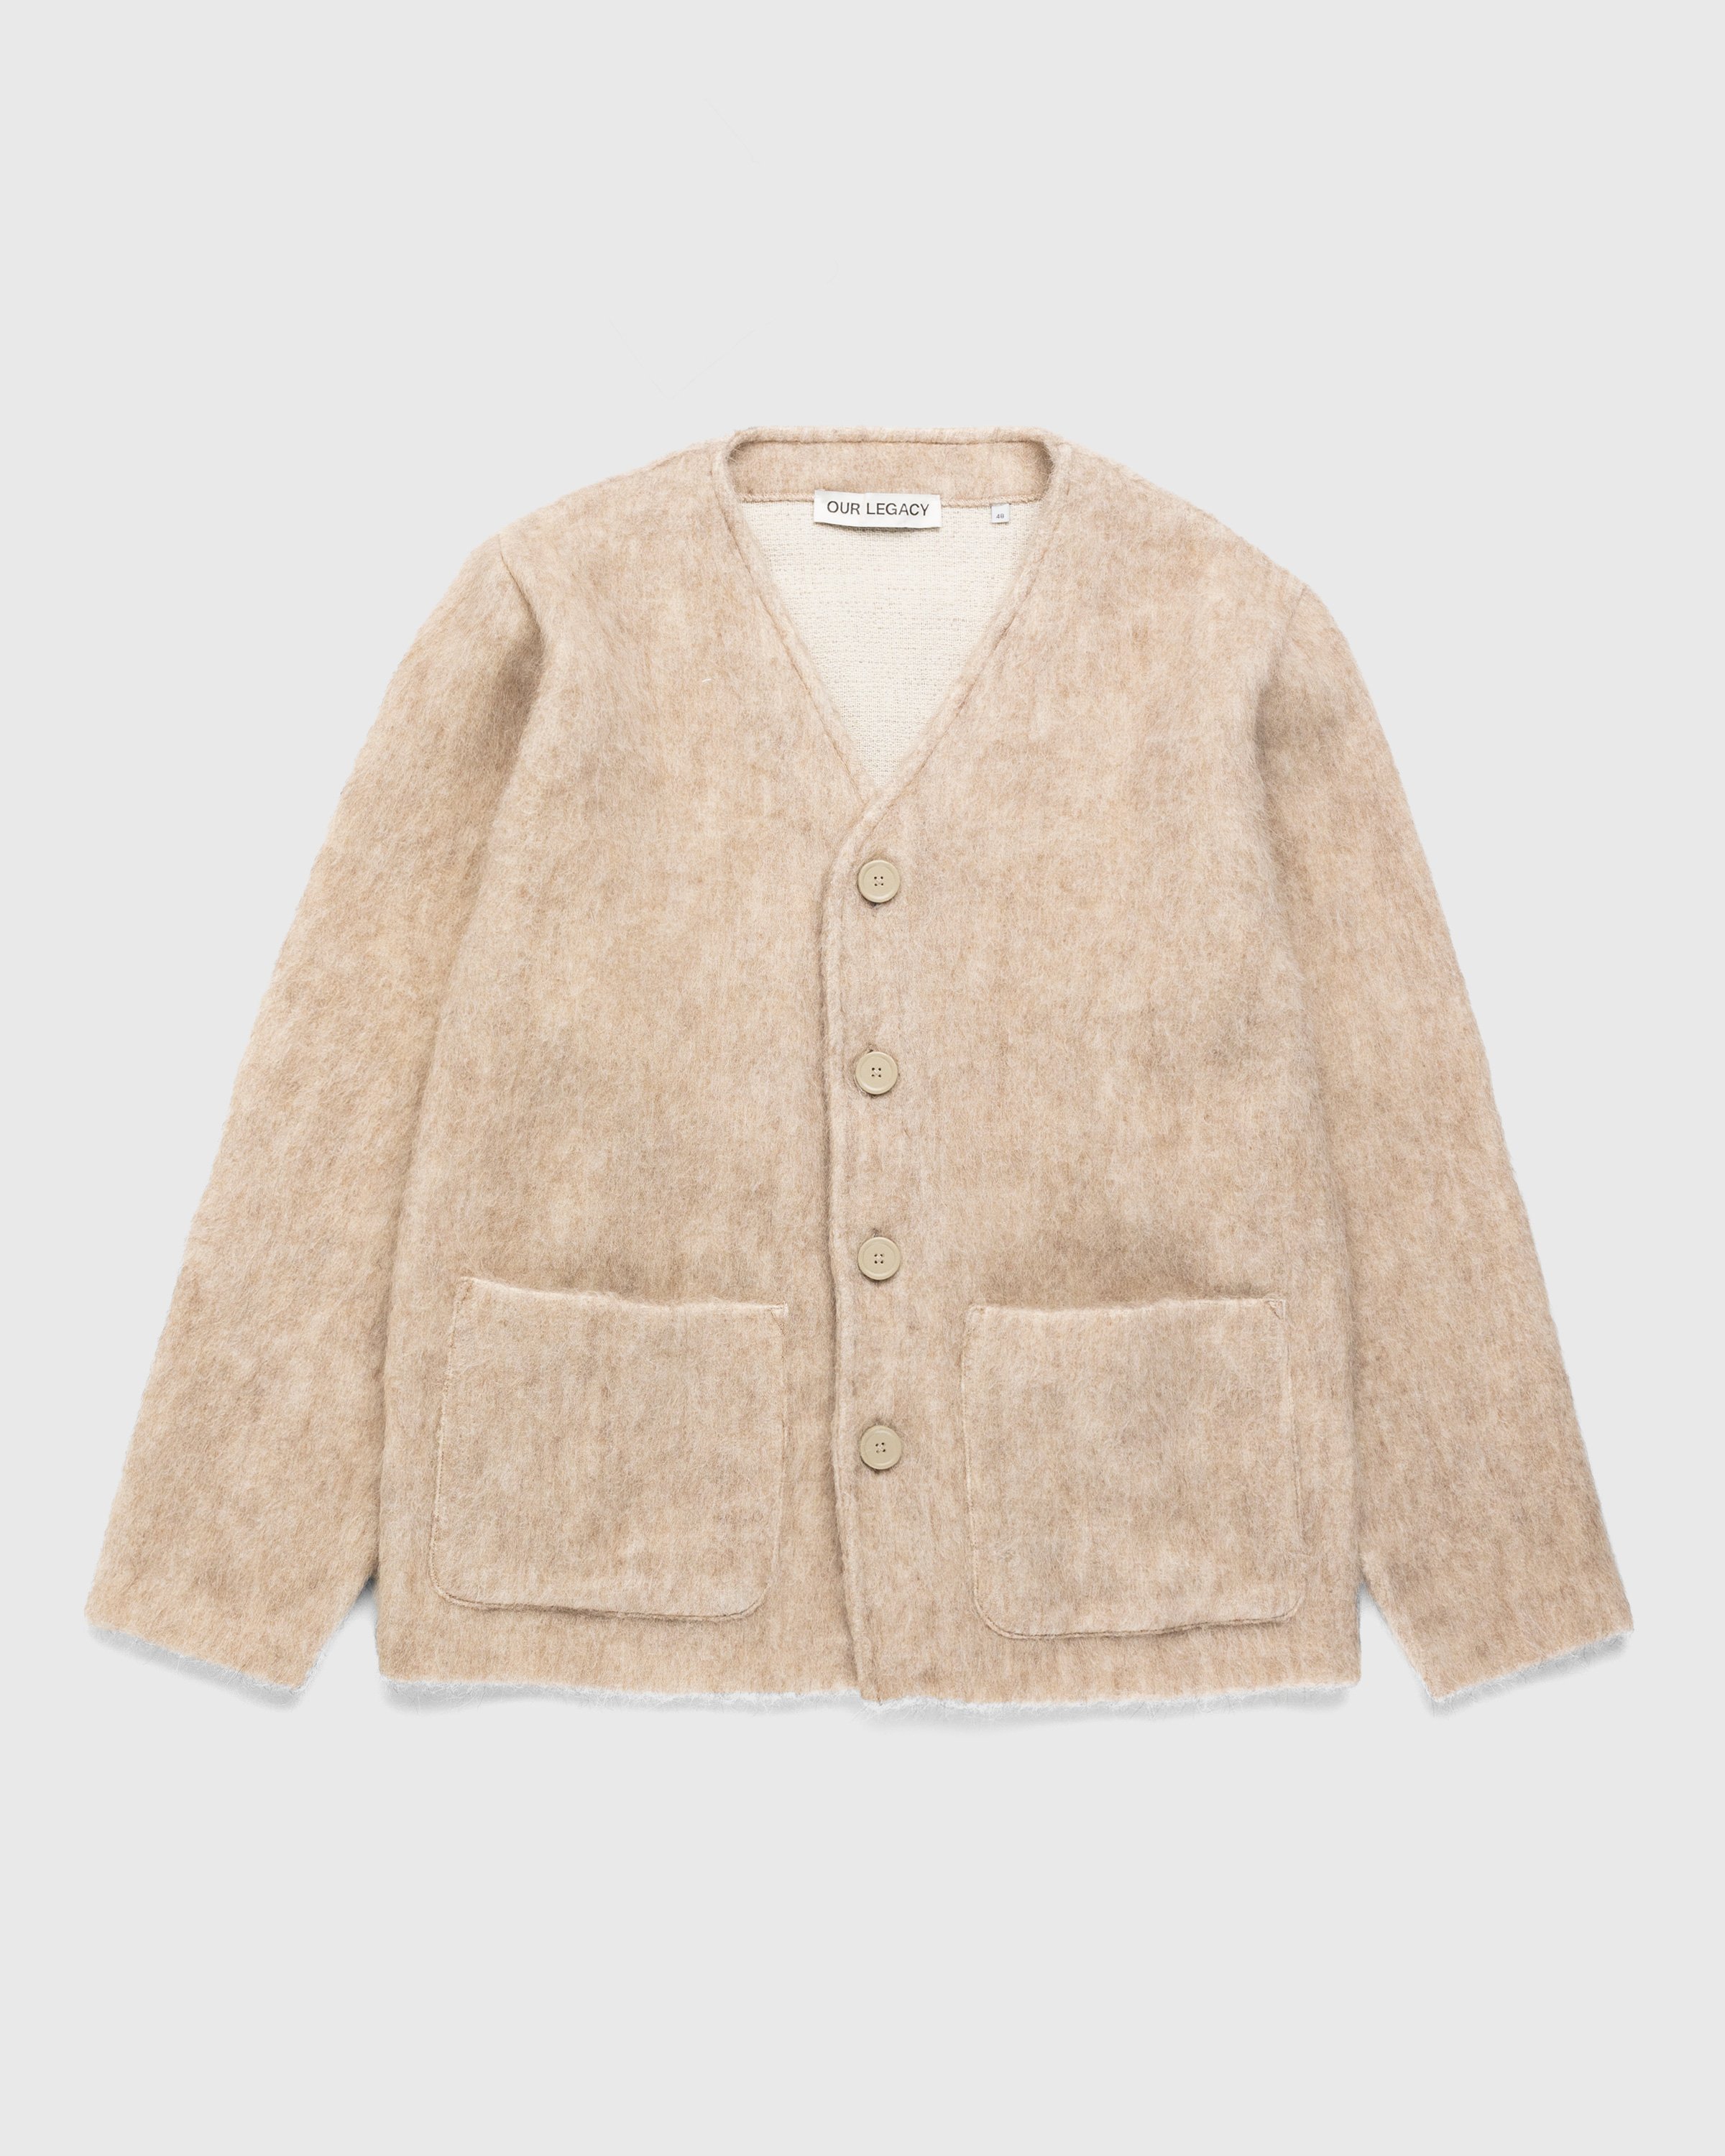 Our Legacy - Mohair Cardigan Antique White - Clothing - Beige - Image 1